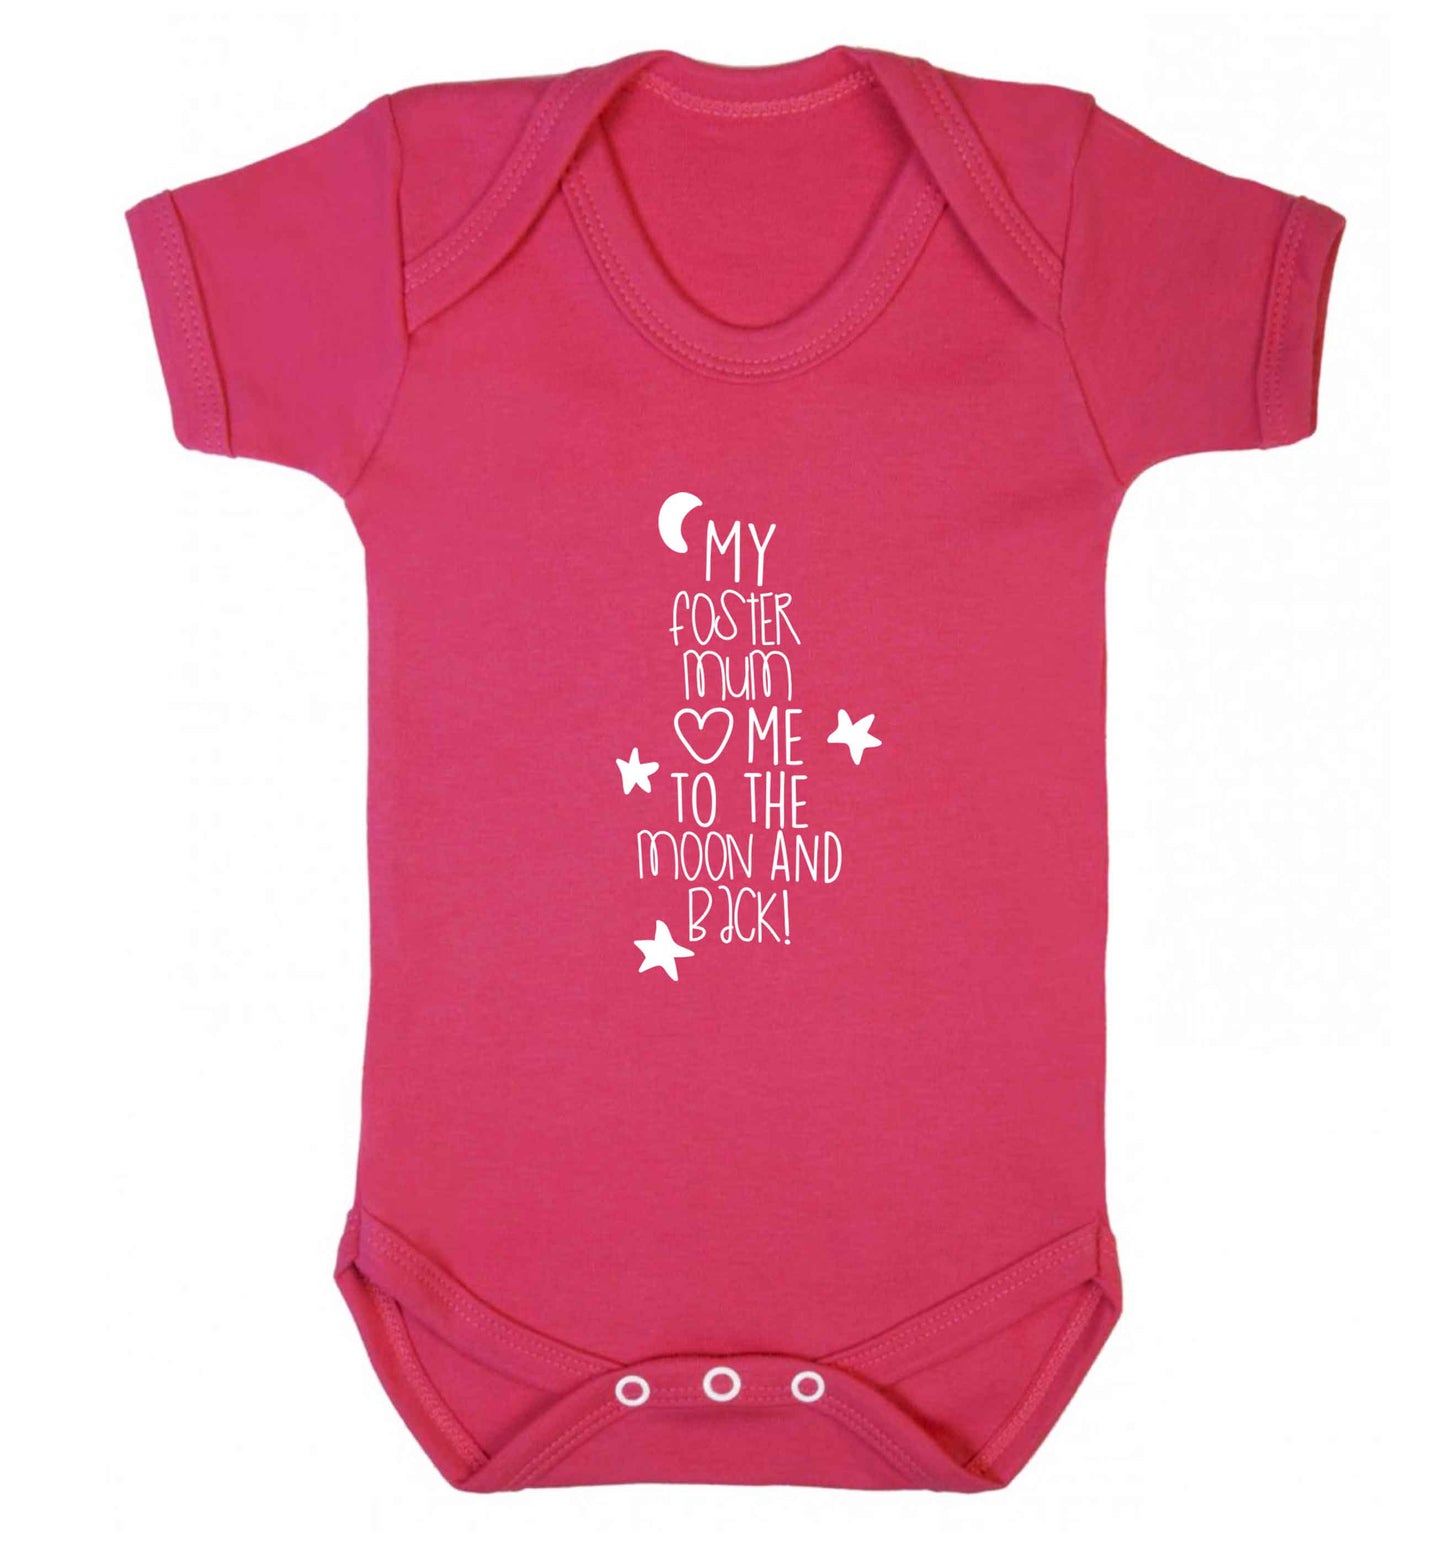 My foster mum loves me to the moon and back baby vest dark pink 18-24 months